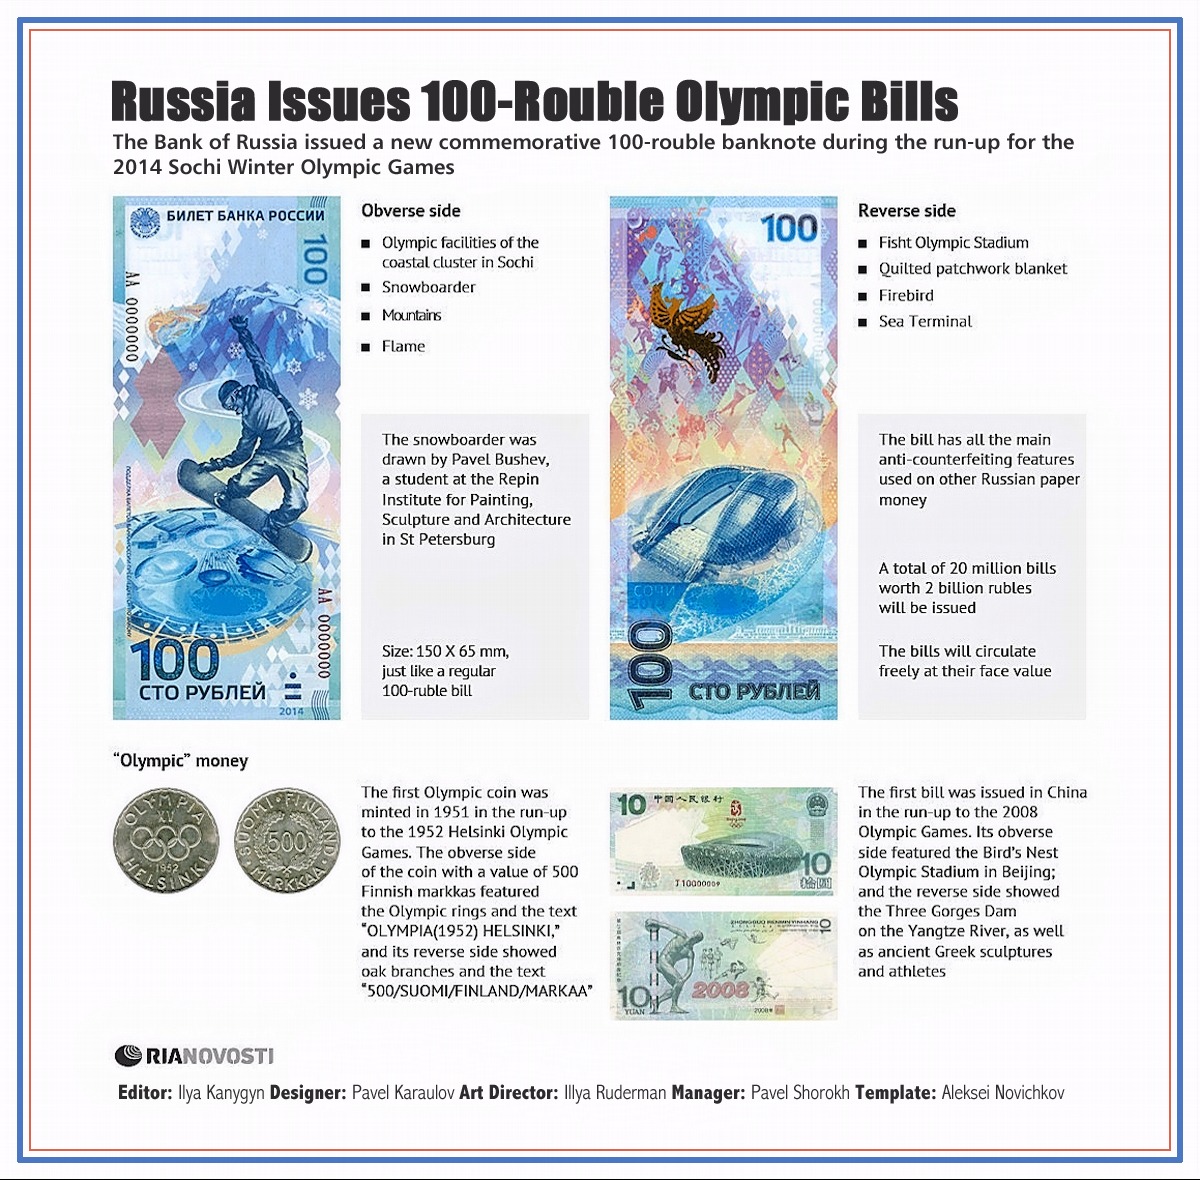 00 RIA-Novosti Infographics. Russia Issues 100-Rouble Olympic Bills. 2013